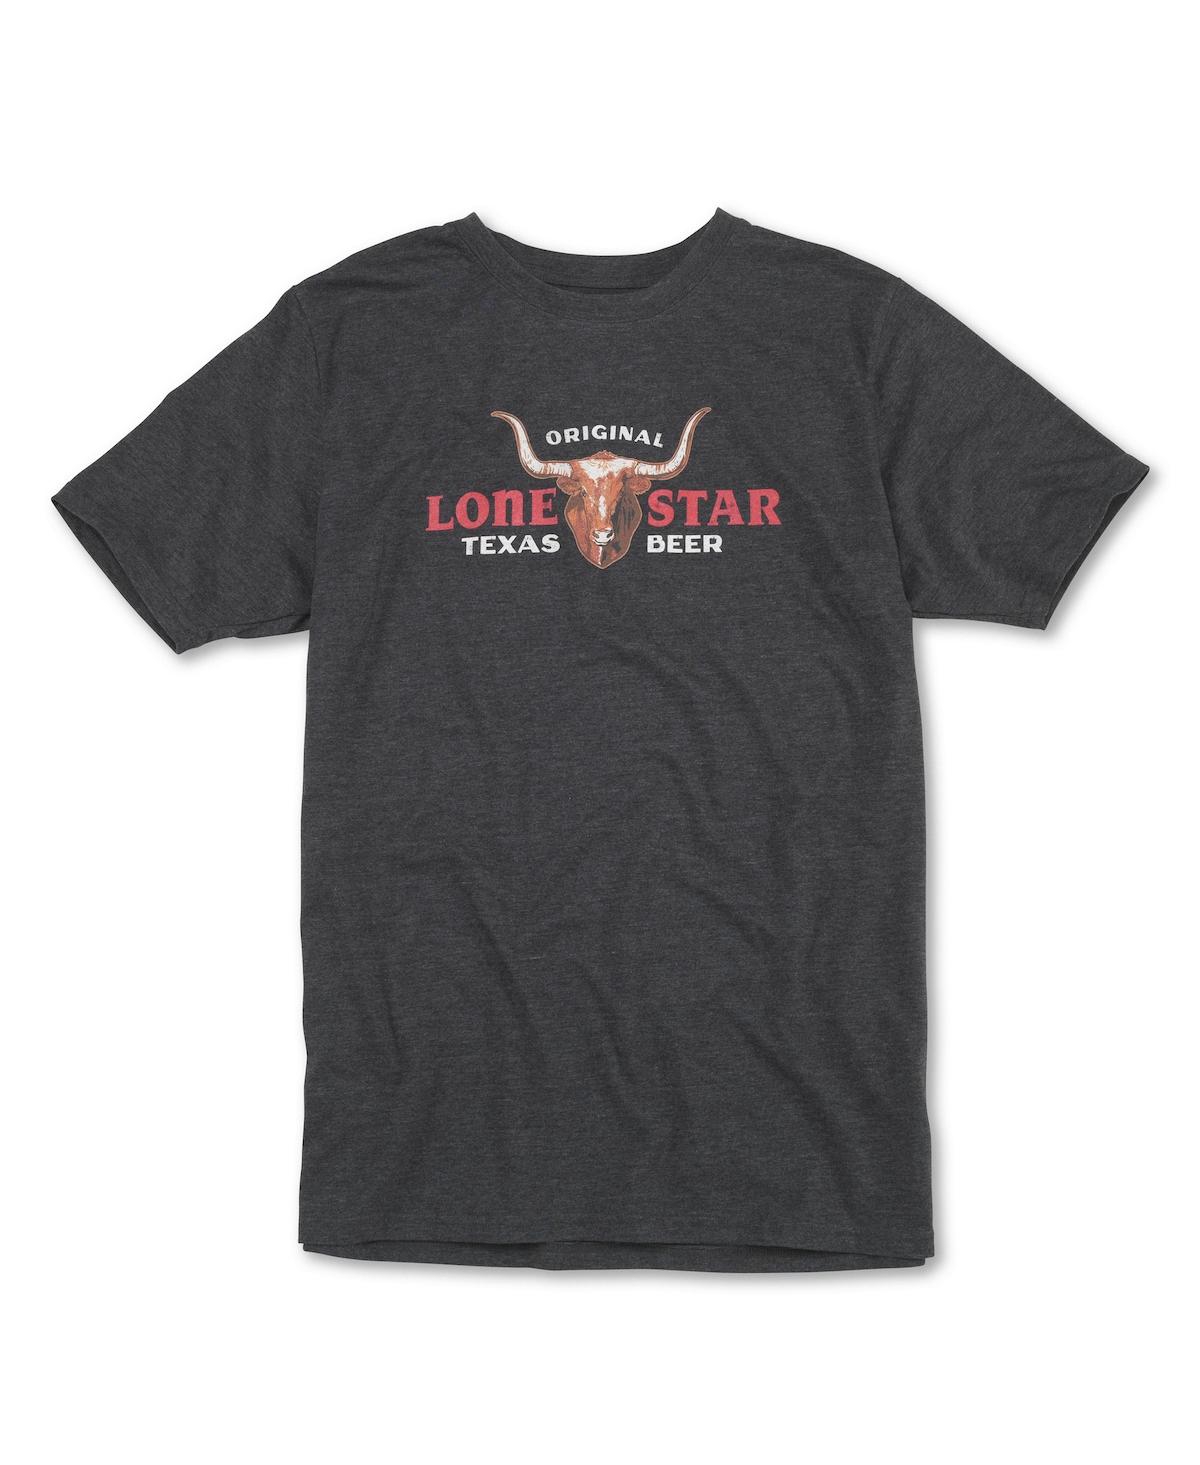 Men's and Women's Heather Charcoal Lone Star Beer Logo T-Shirt - Heather Charcoal